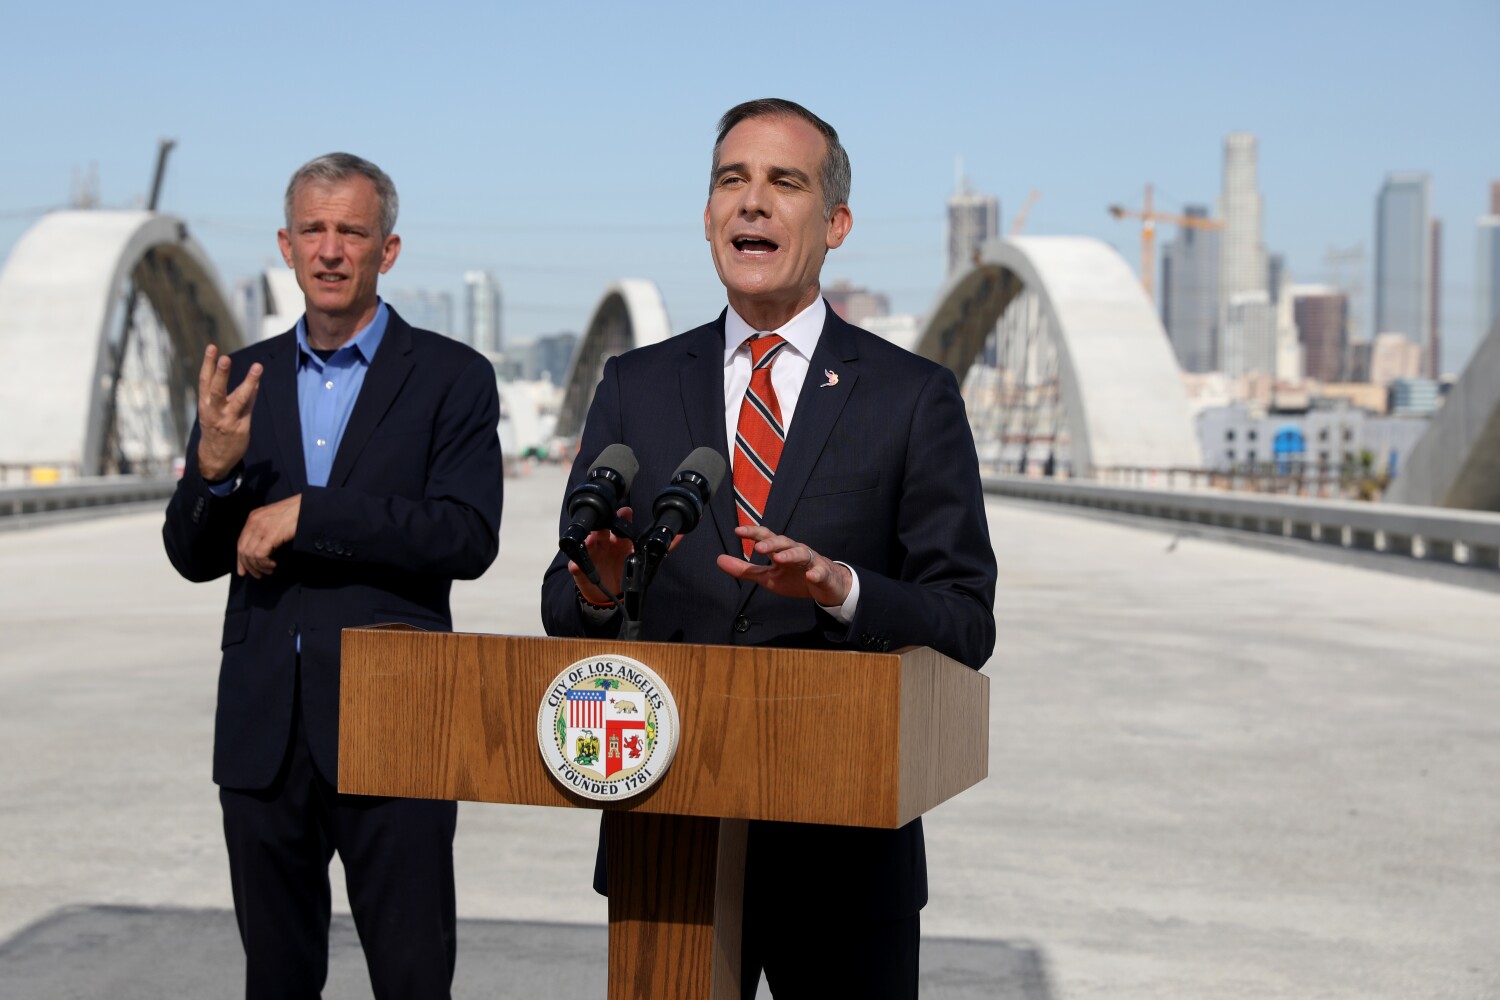 Garcetti vows a 'safer city' in final State of the City speech